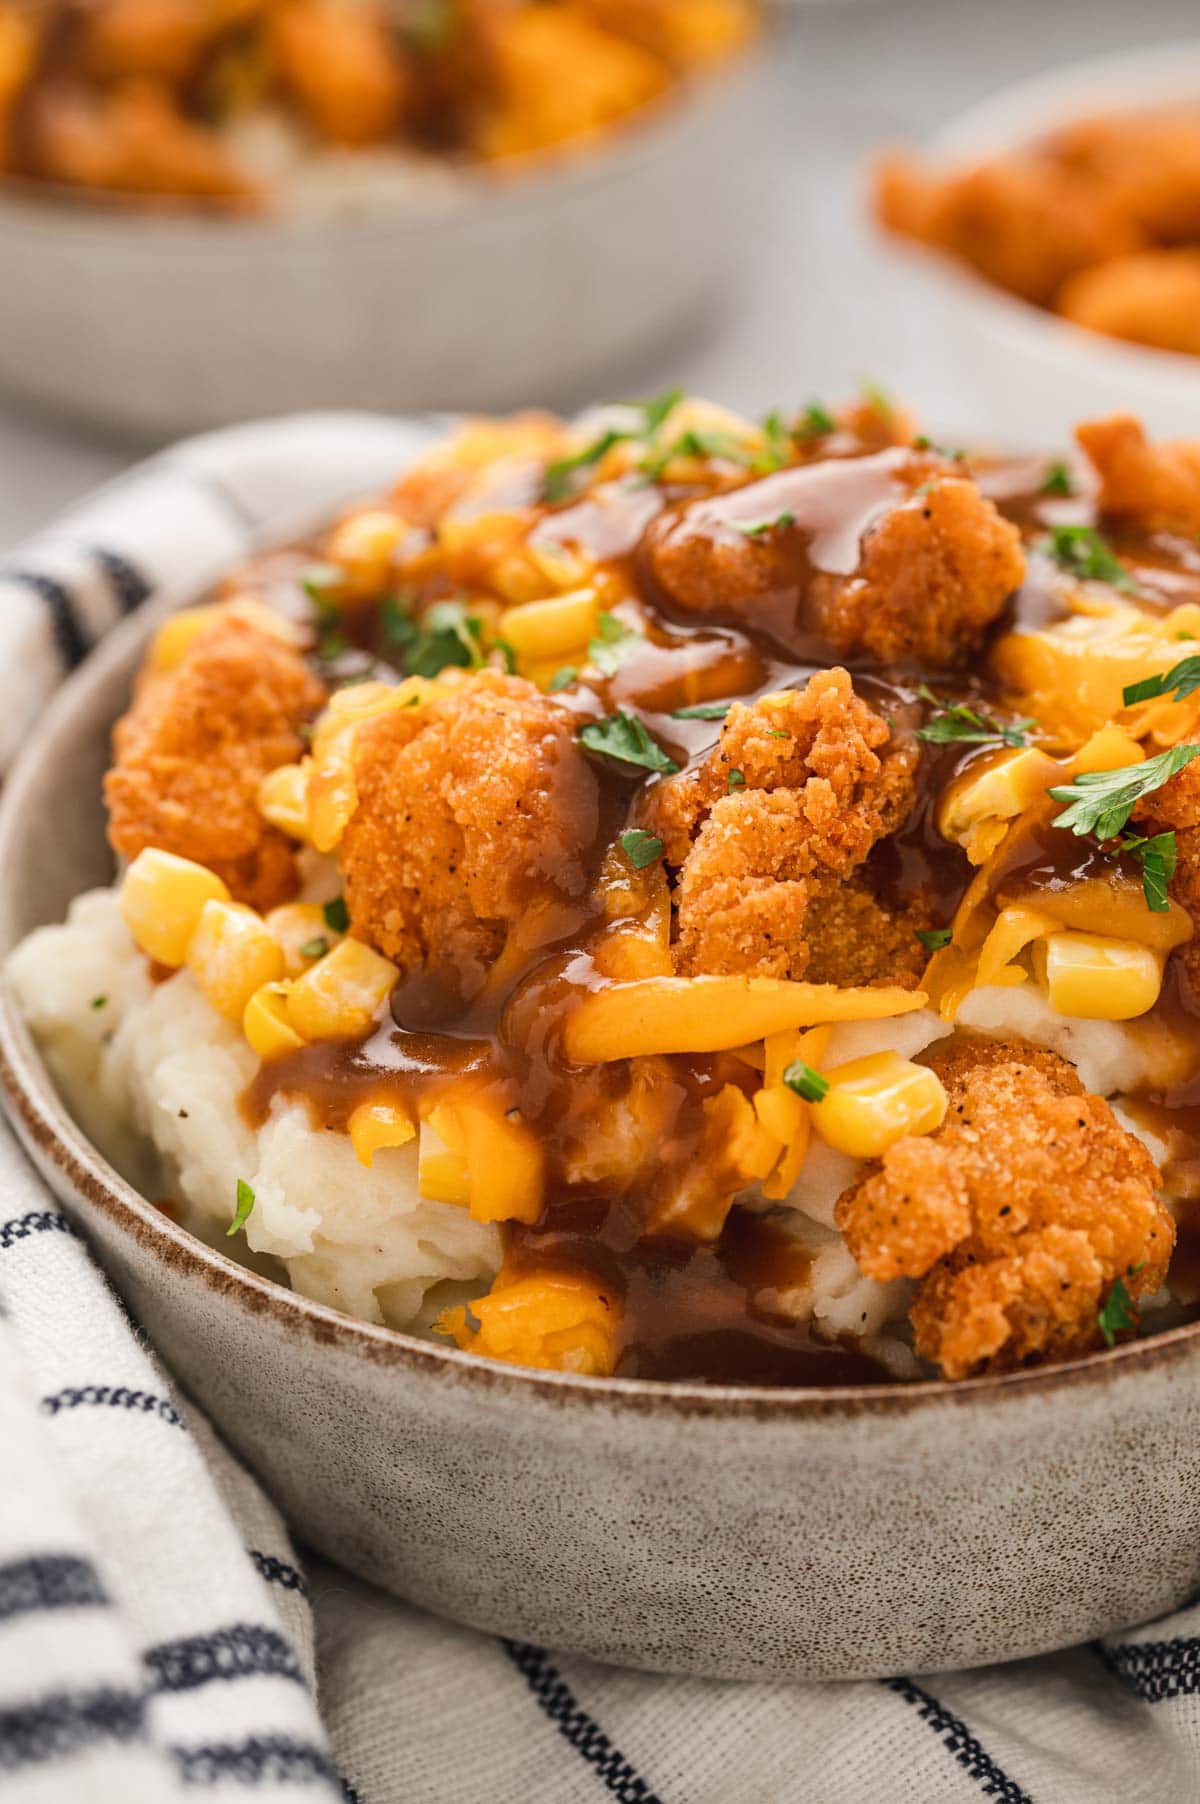 MAshed potatoes topped with corn, cheese, gravy adn popcurn chicken.